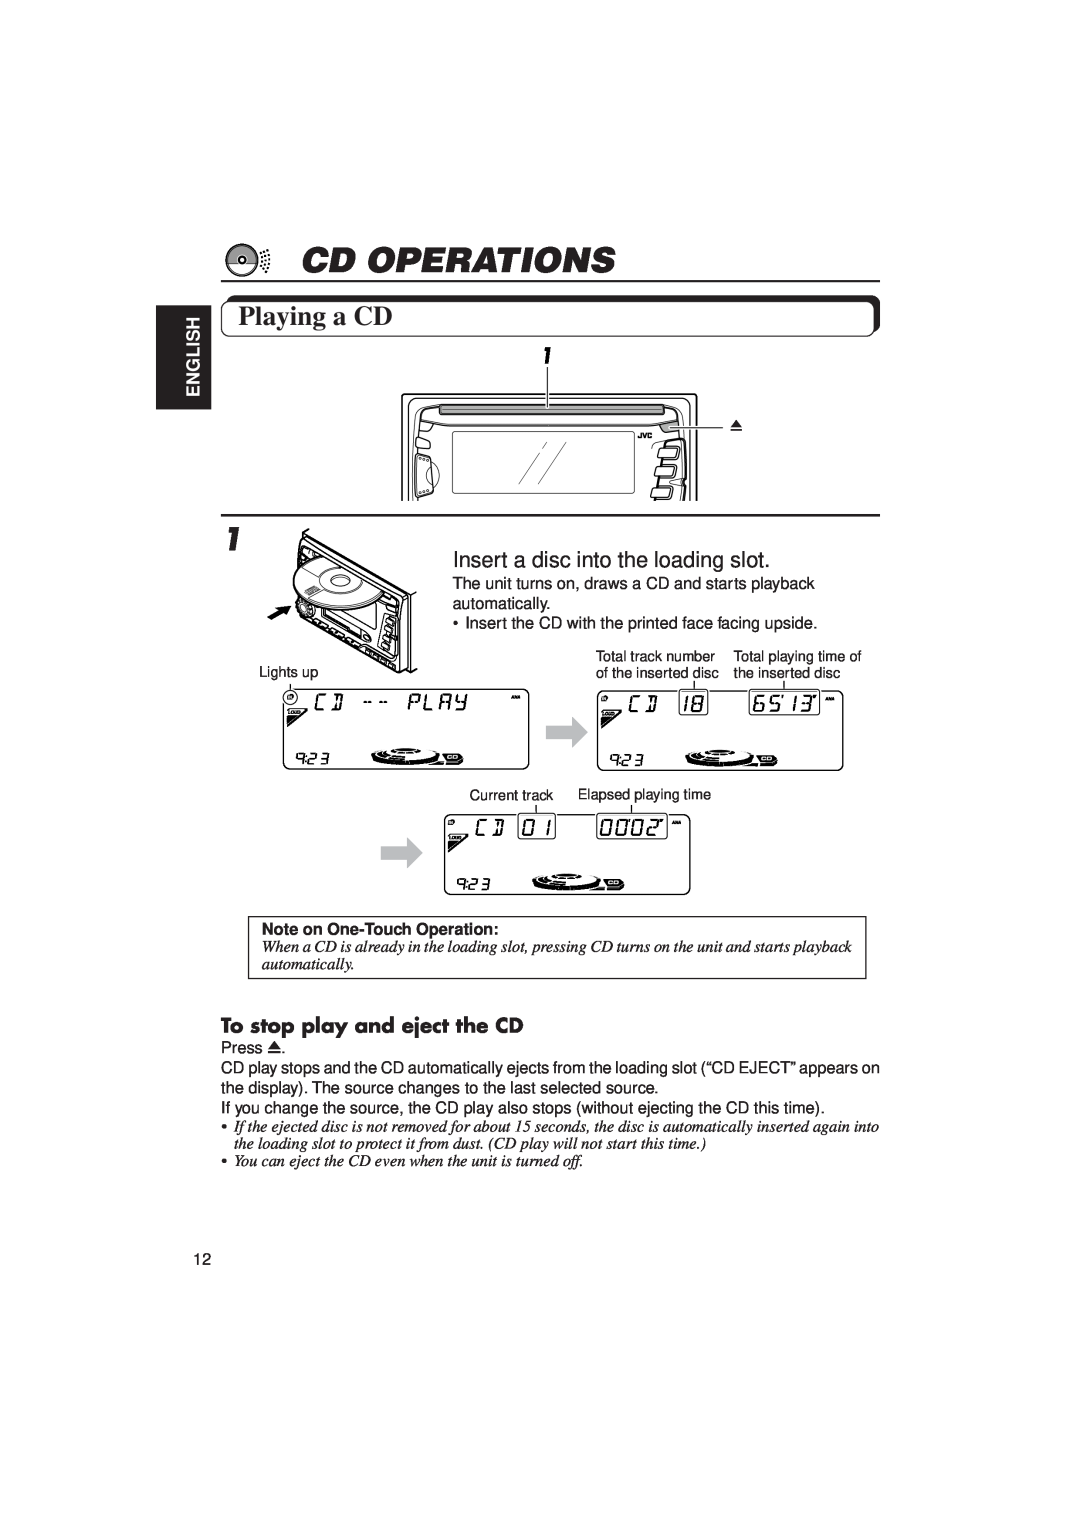 JVC KW-XC770 manual Cd Operations, Playing a CD, To stop play and eject the CD, English, Note on One-Touch Operation 